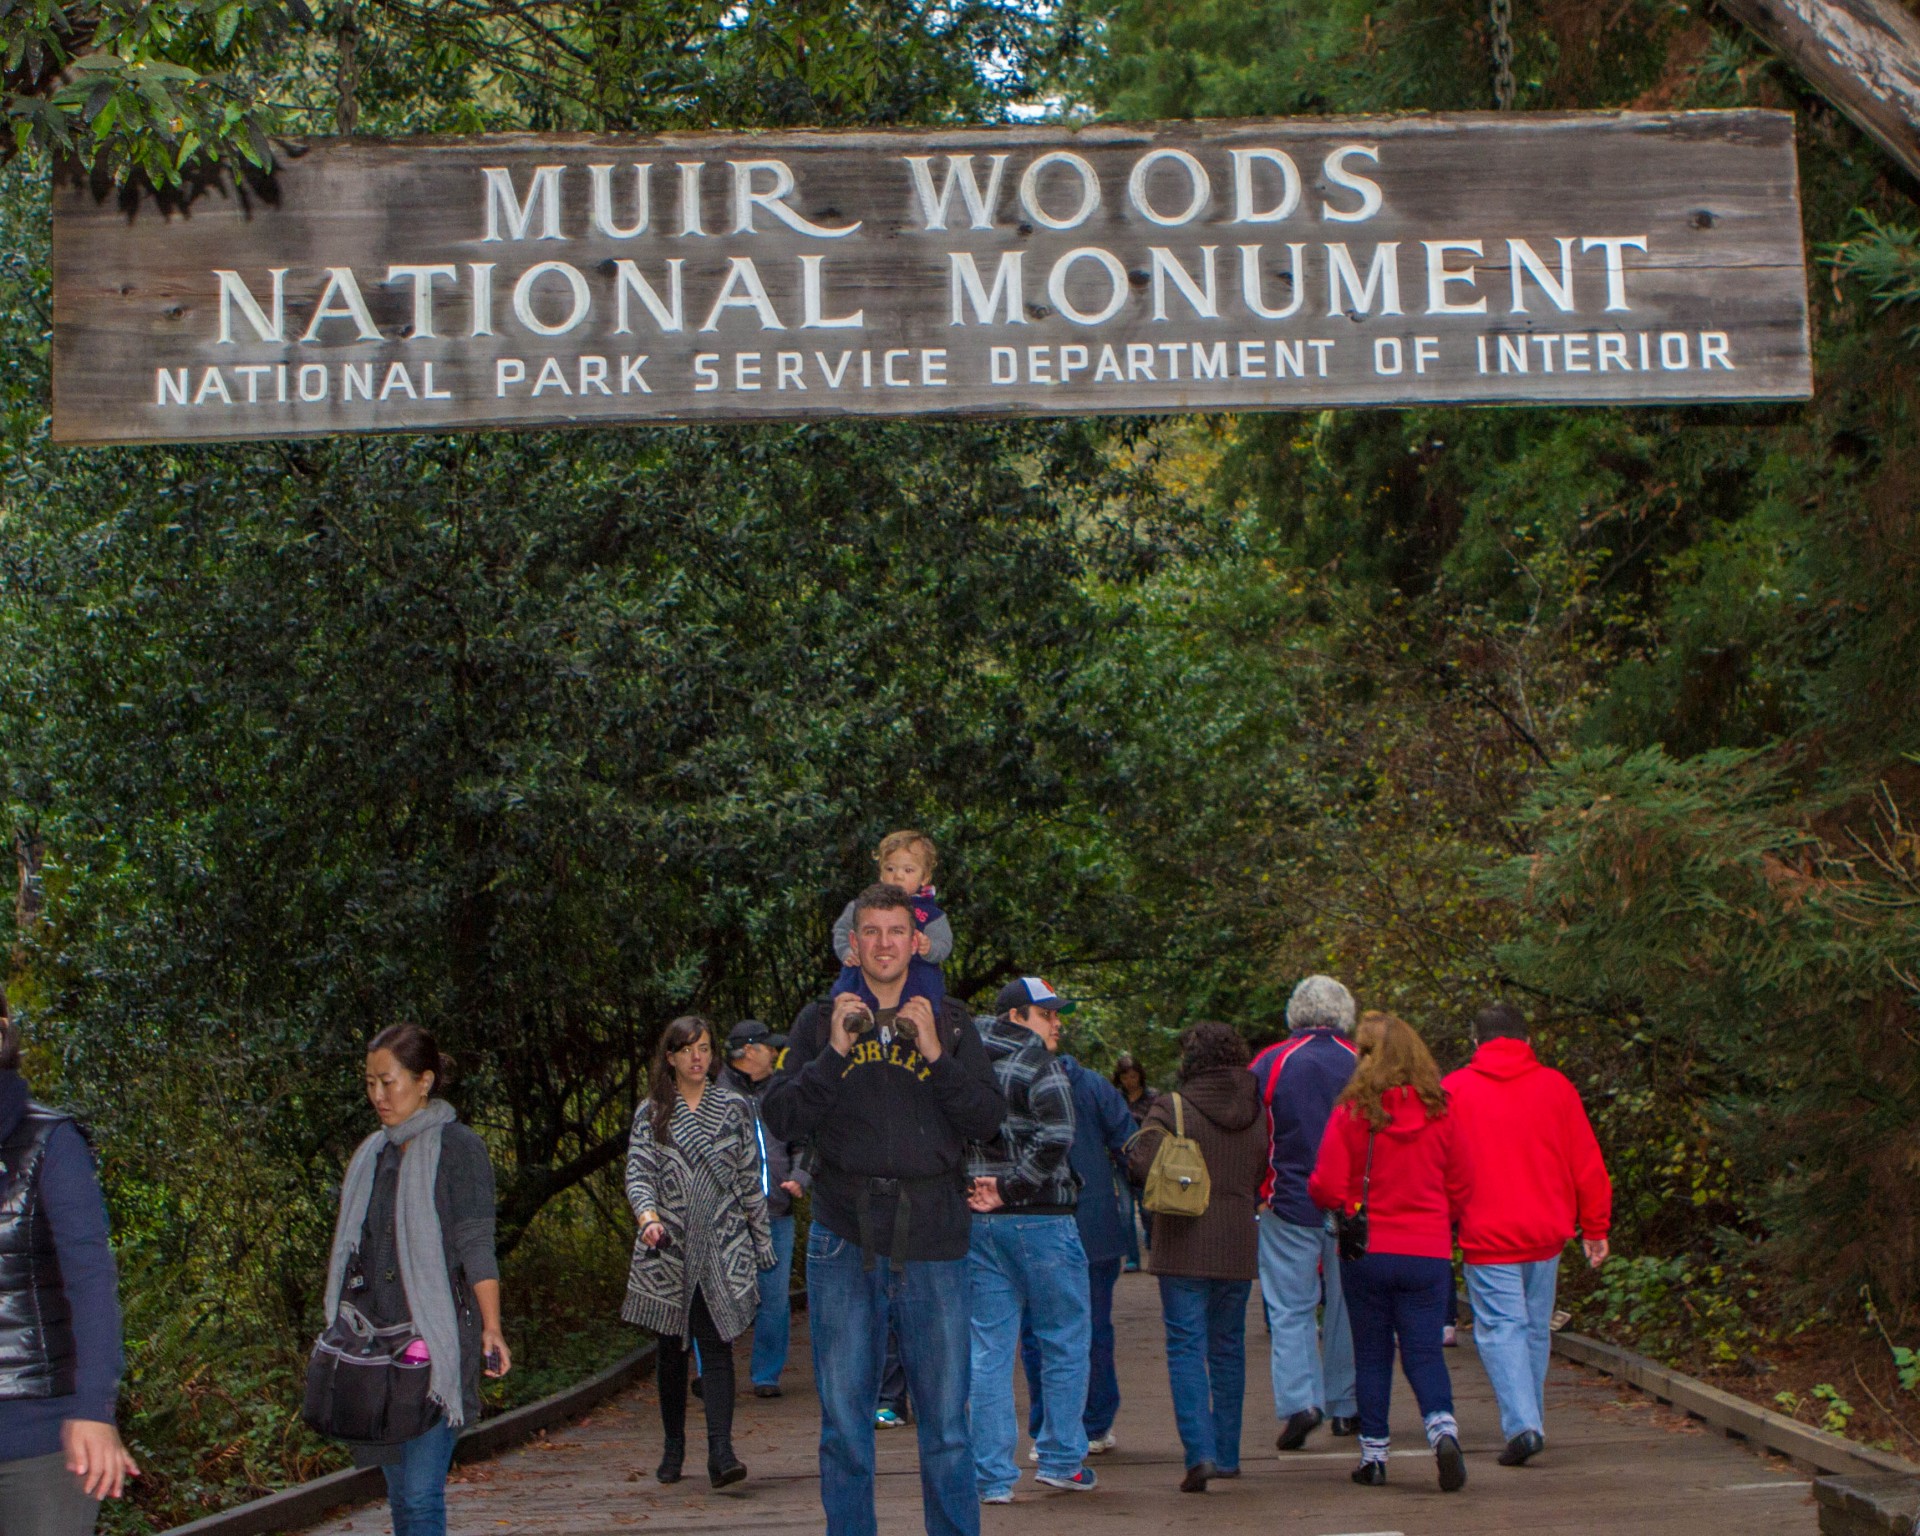 Father with son at main trail entrance of Muir Woods National Monument